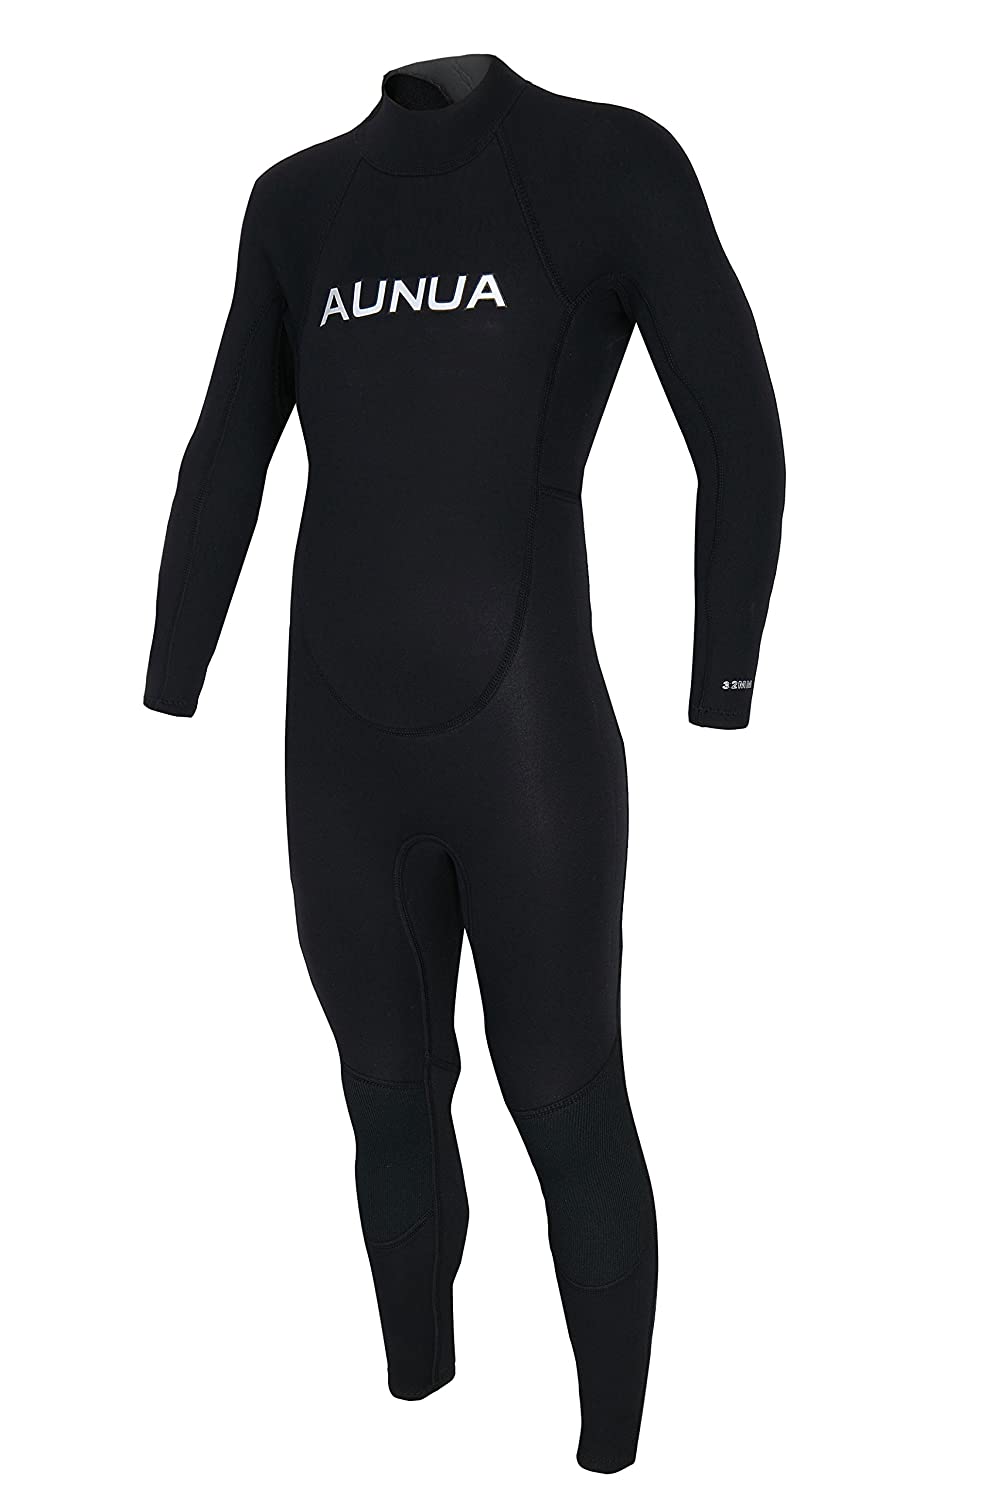 Aunua Youth 3/2mm Neoprene Wetsuits for Kids Full Wetsuit Swimming Suit Keep Warm